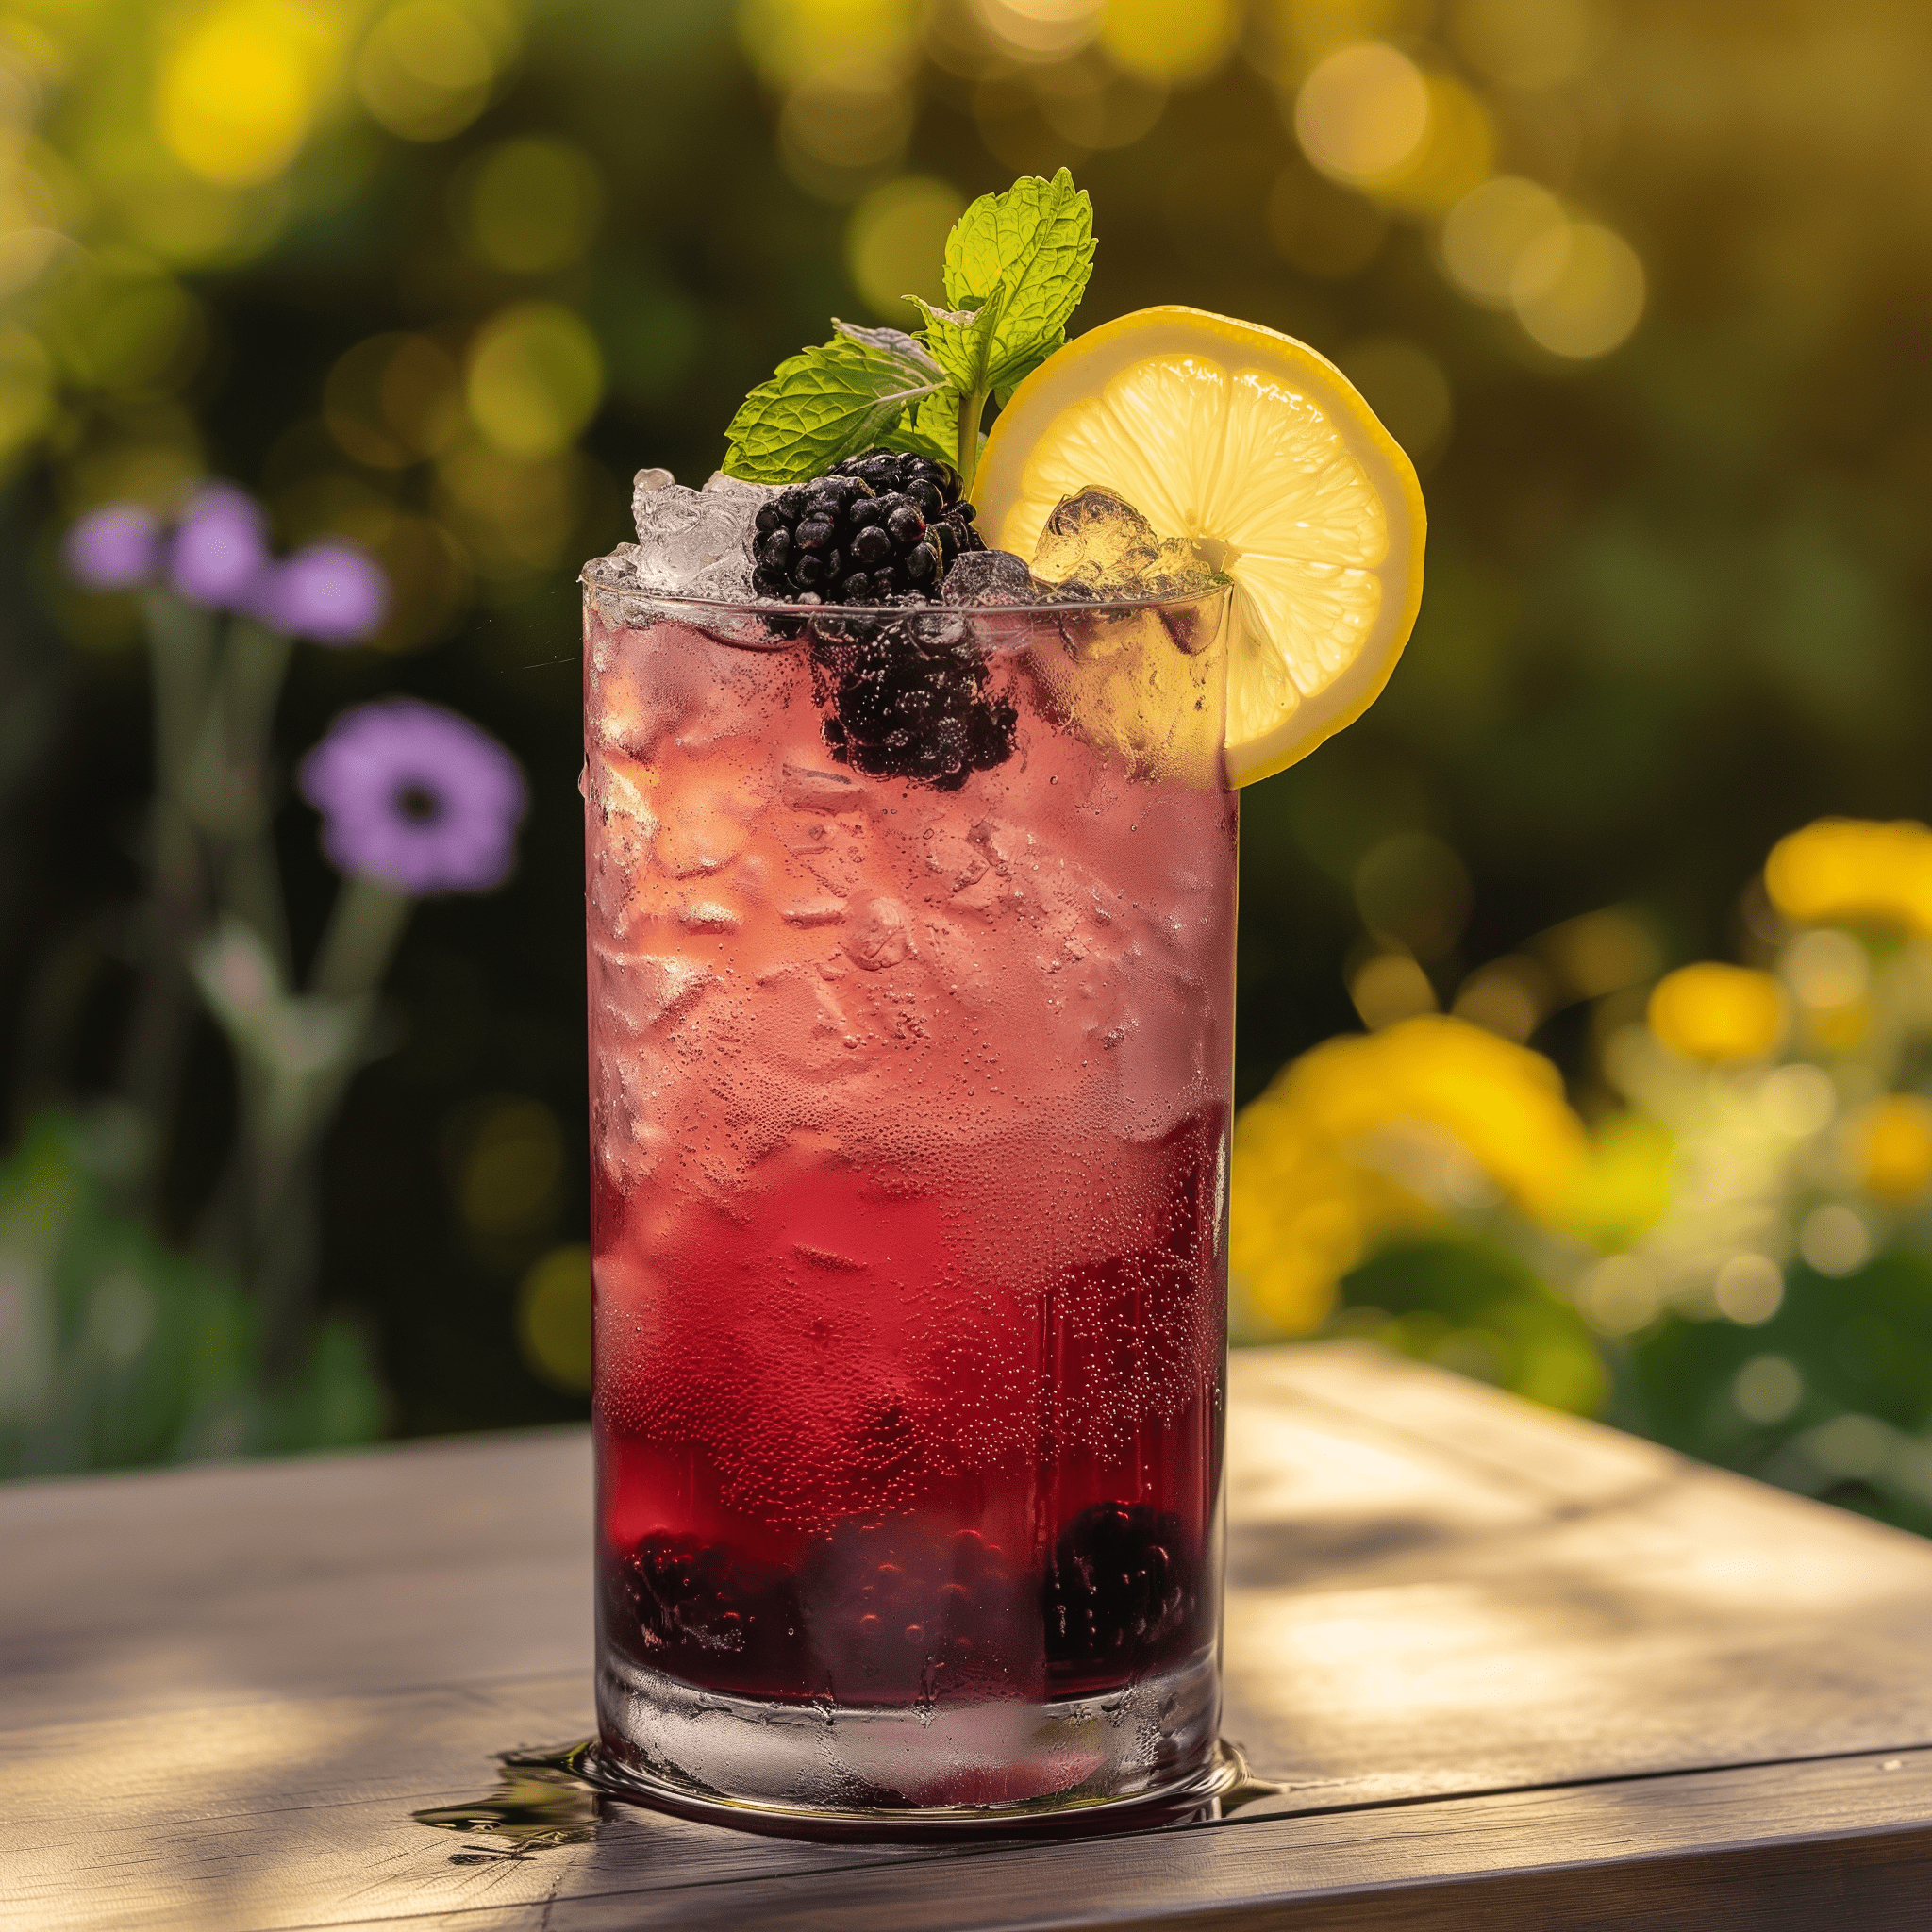 Blackberry Smash Mocktail Recipe - The Blackberry Smash Mocktail offers a refreshing and vibrant taste profile. It's a delightful blend of tart blackberries, bright citrus, and a subtle hint of mint. The sweetness is perfectly balanced with the acidity of the lemon, creating a drink that's both invigorating and satisfying.